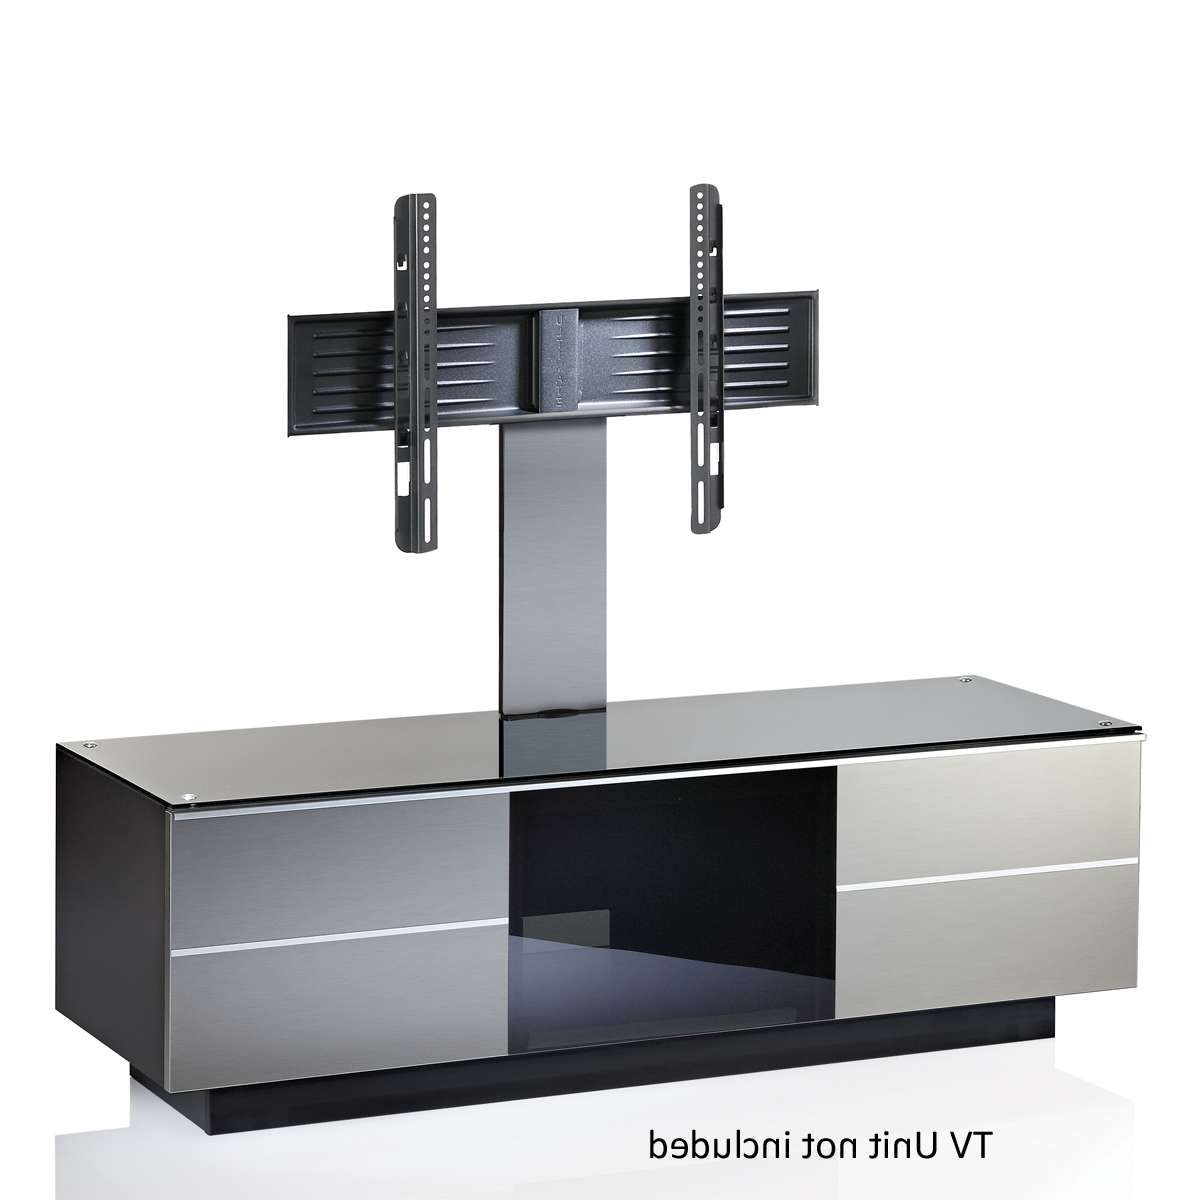 Inox G B 80 Inx Cantilever Tv Bracket,ukcf Ultimate,,uk Cf Intended For Cantilever Tv Stands (View 9 of 15)